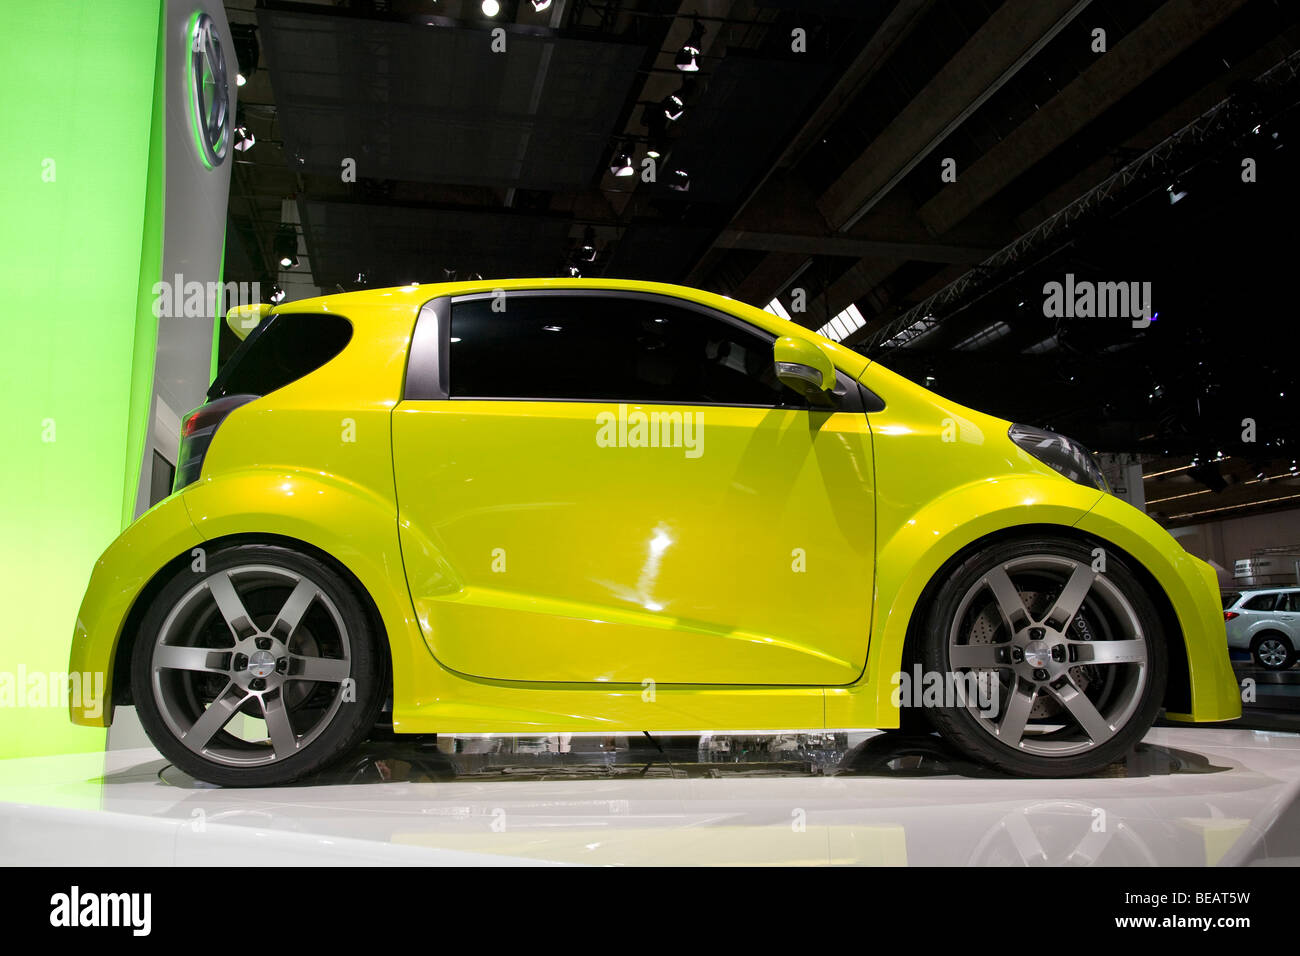 The Toyota IQ concept at a European motor show Stock Photo